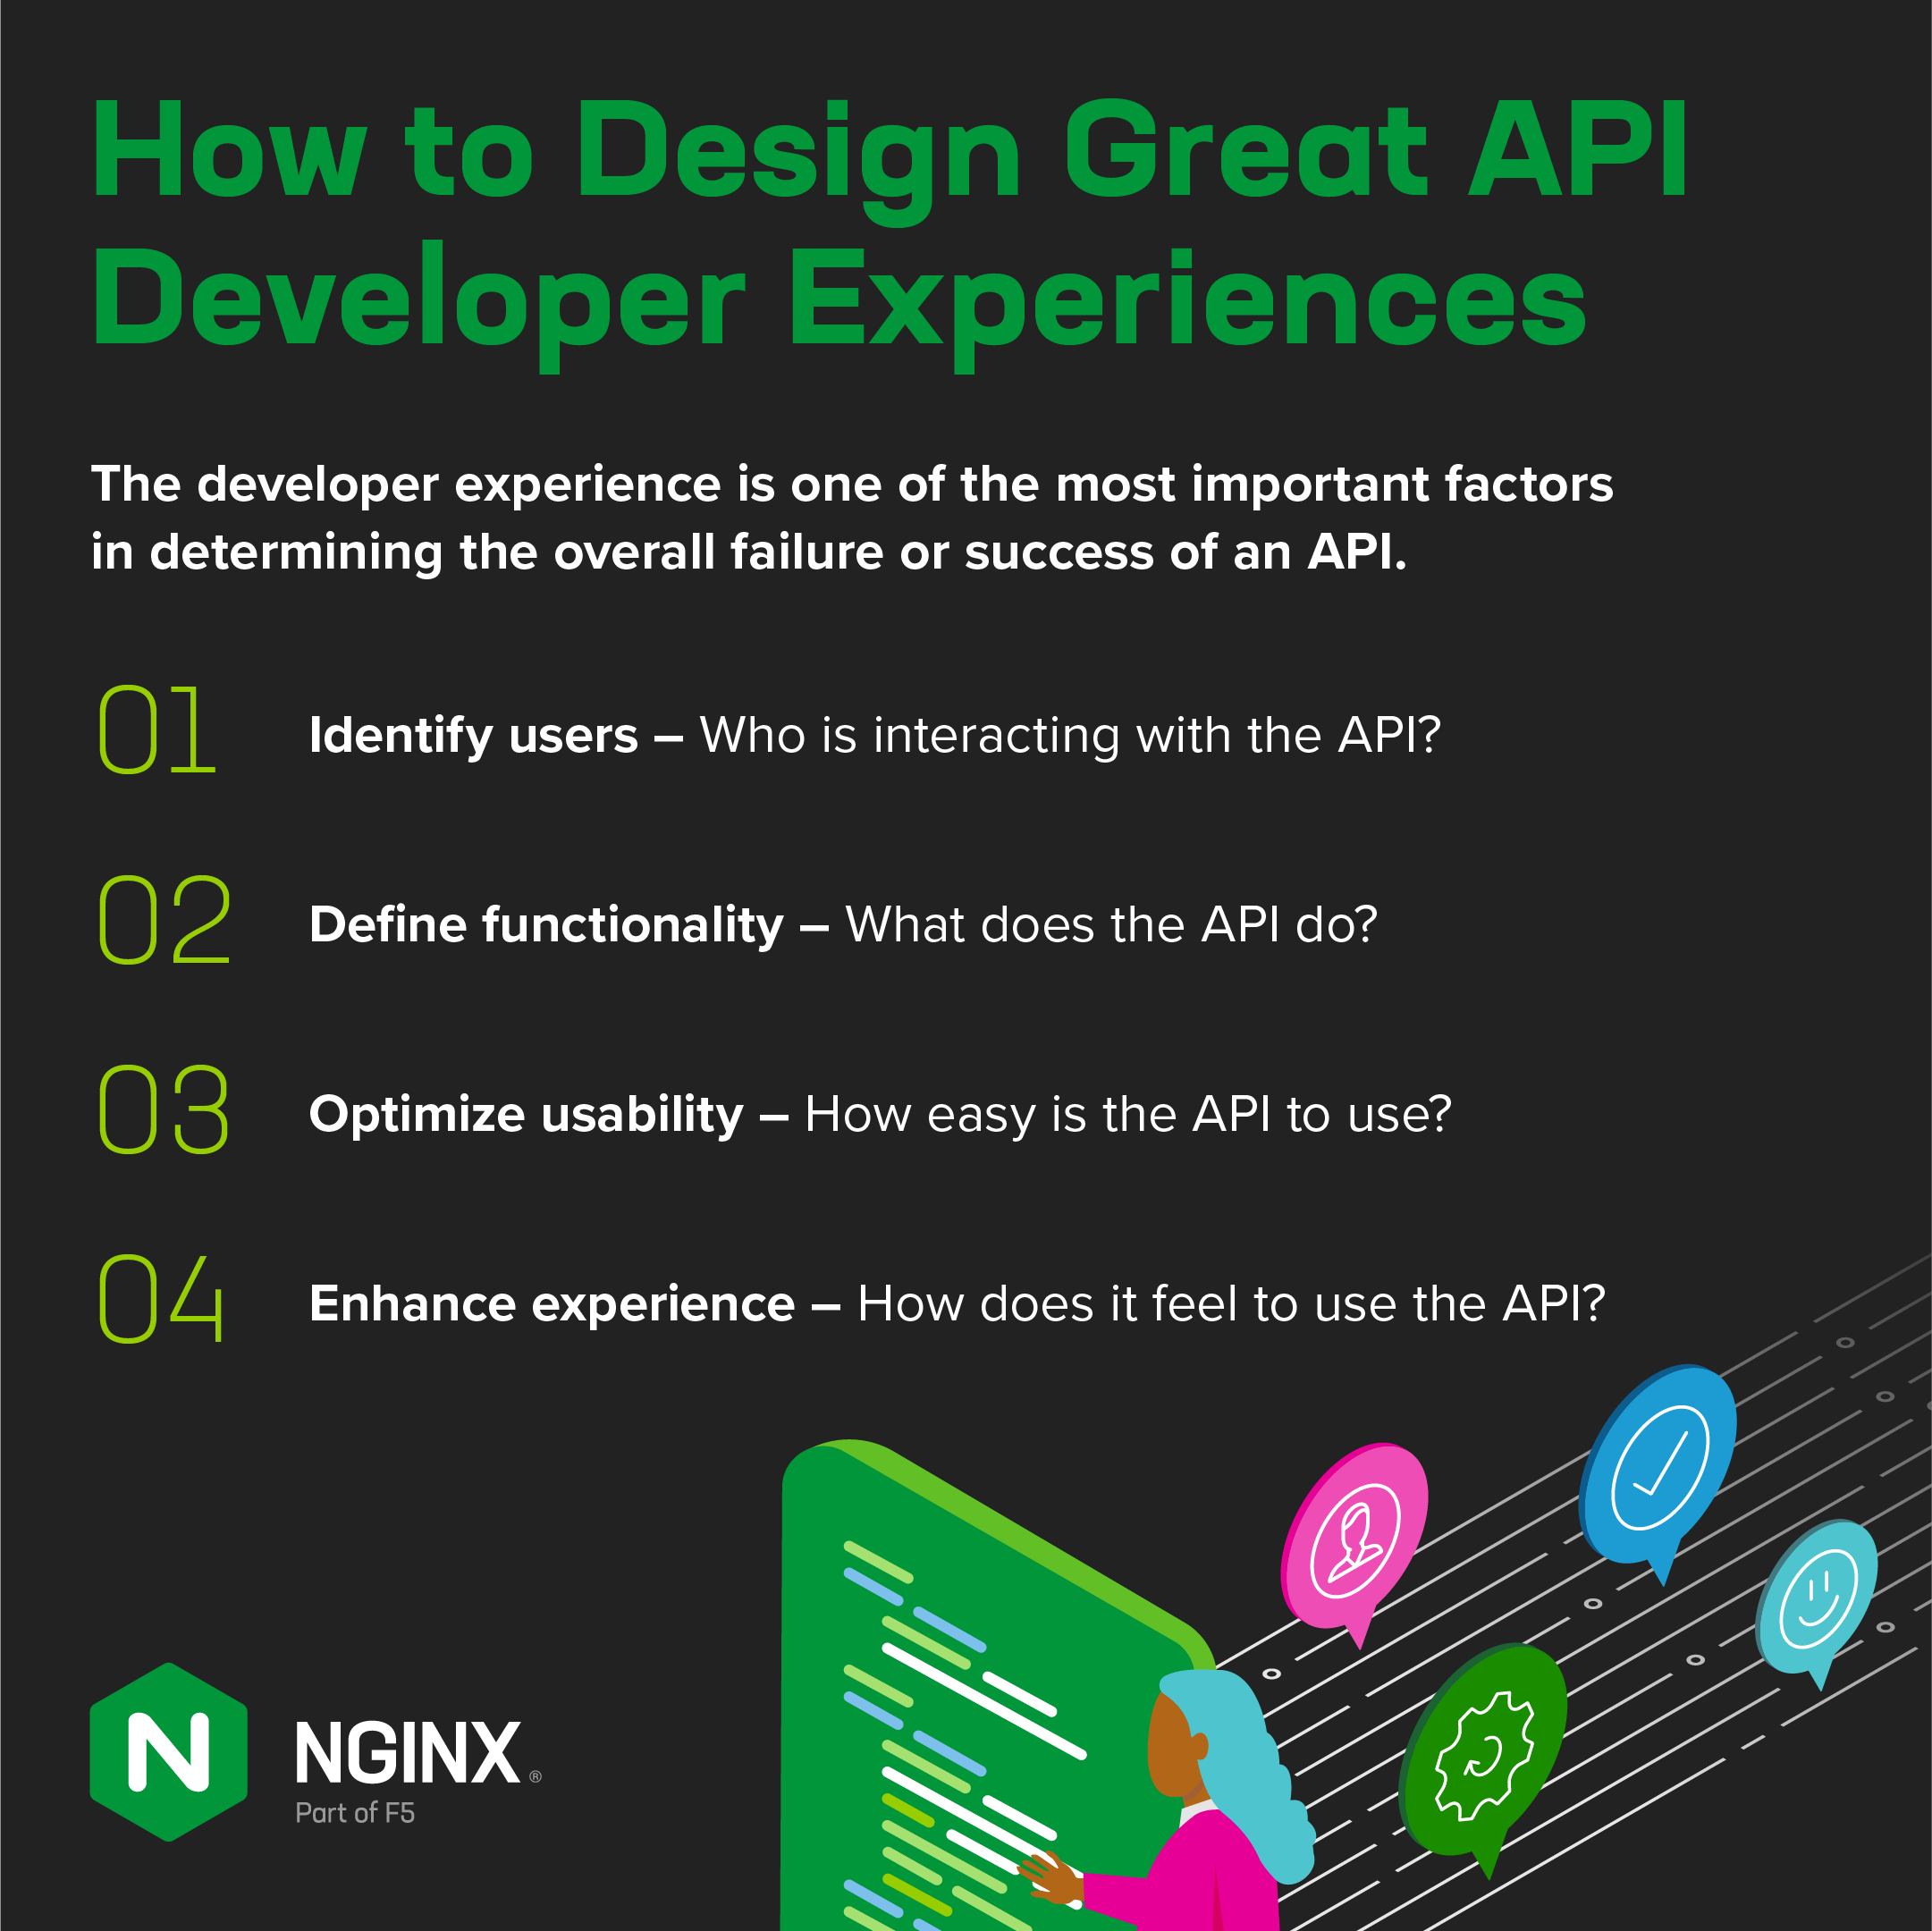 Graphic listing the four principles of API design: Identify users, Define functionality, Optimize usability, and Enhance experience